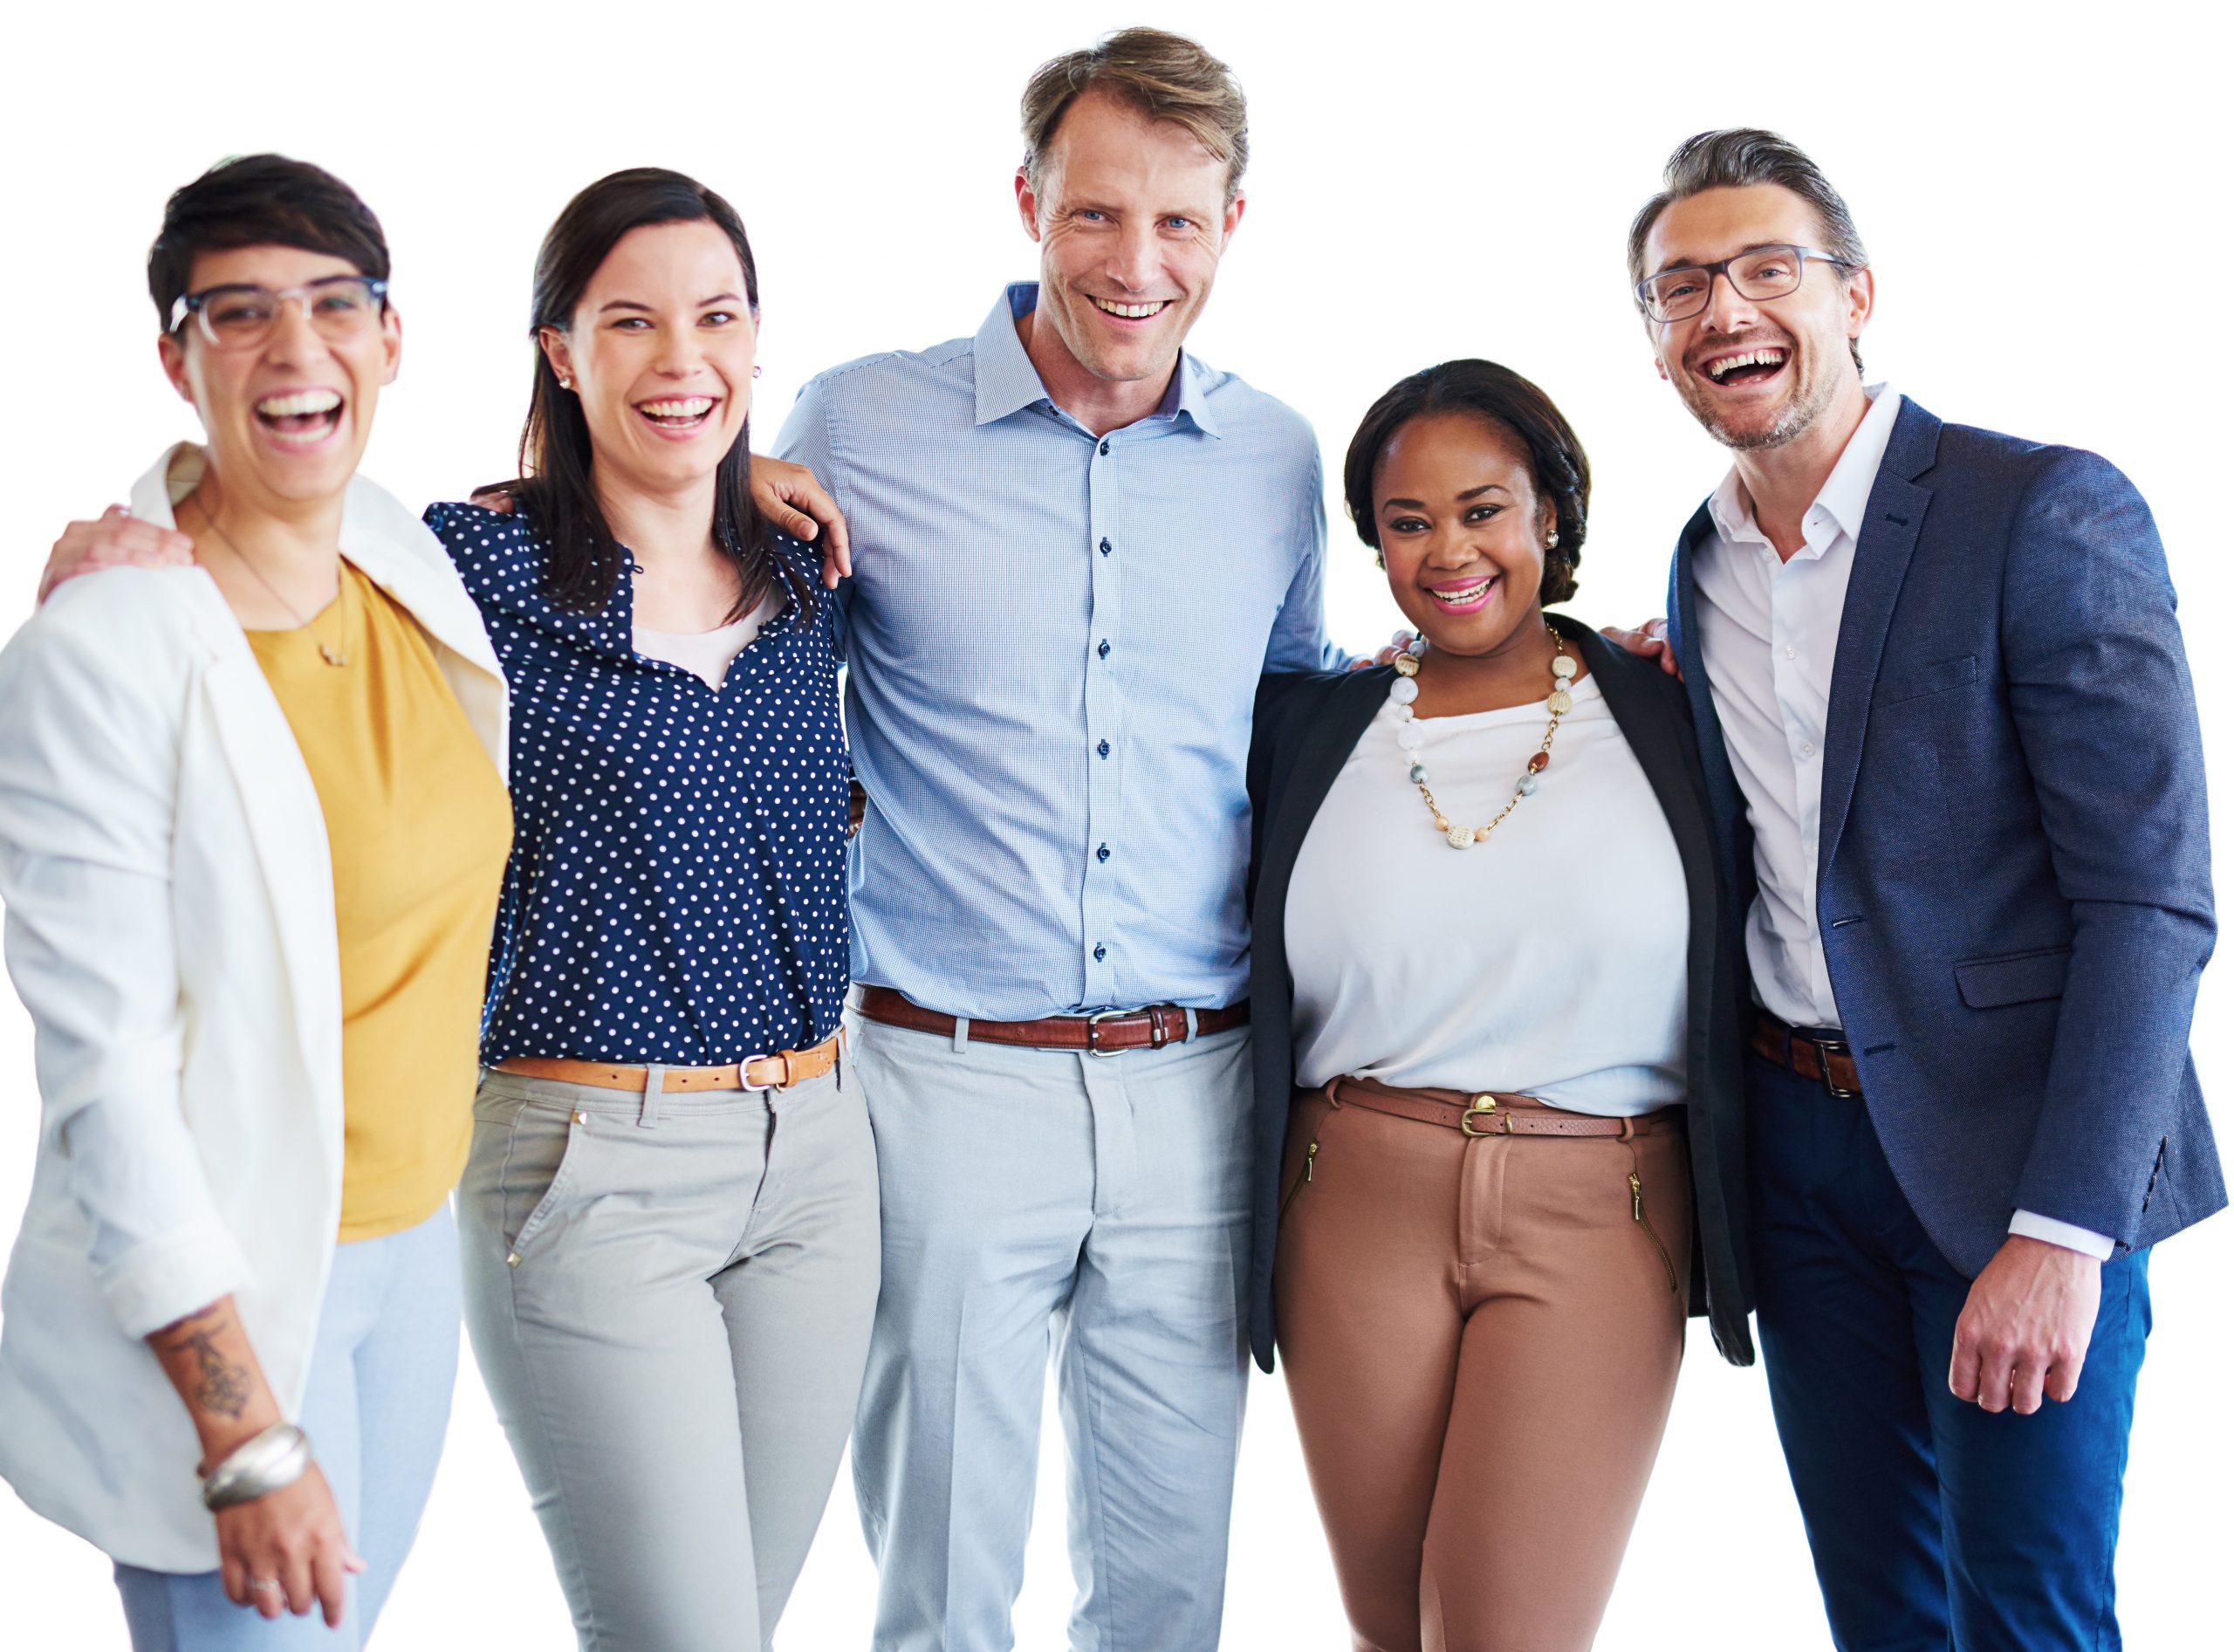 image: a group of diverse people in business attire holding each other and smiling at the camer